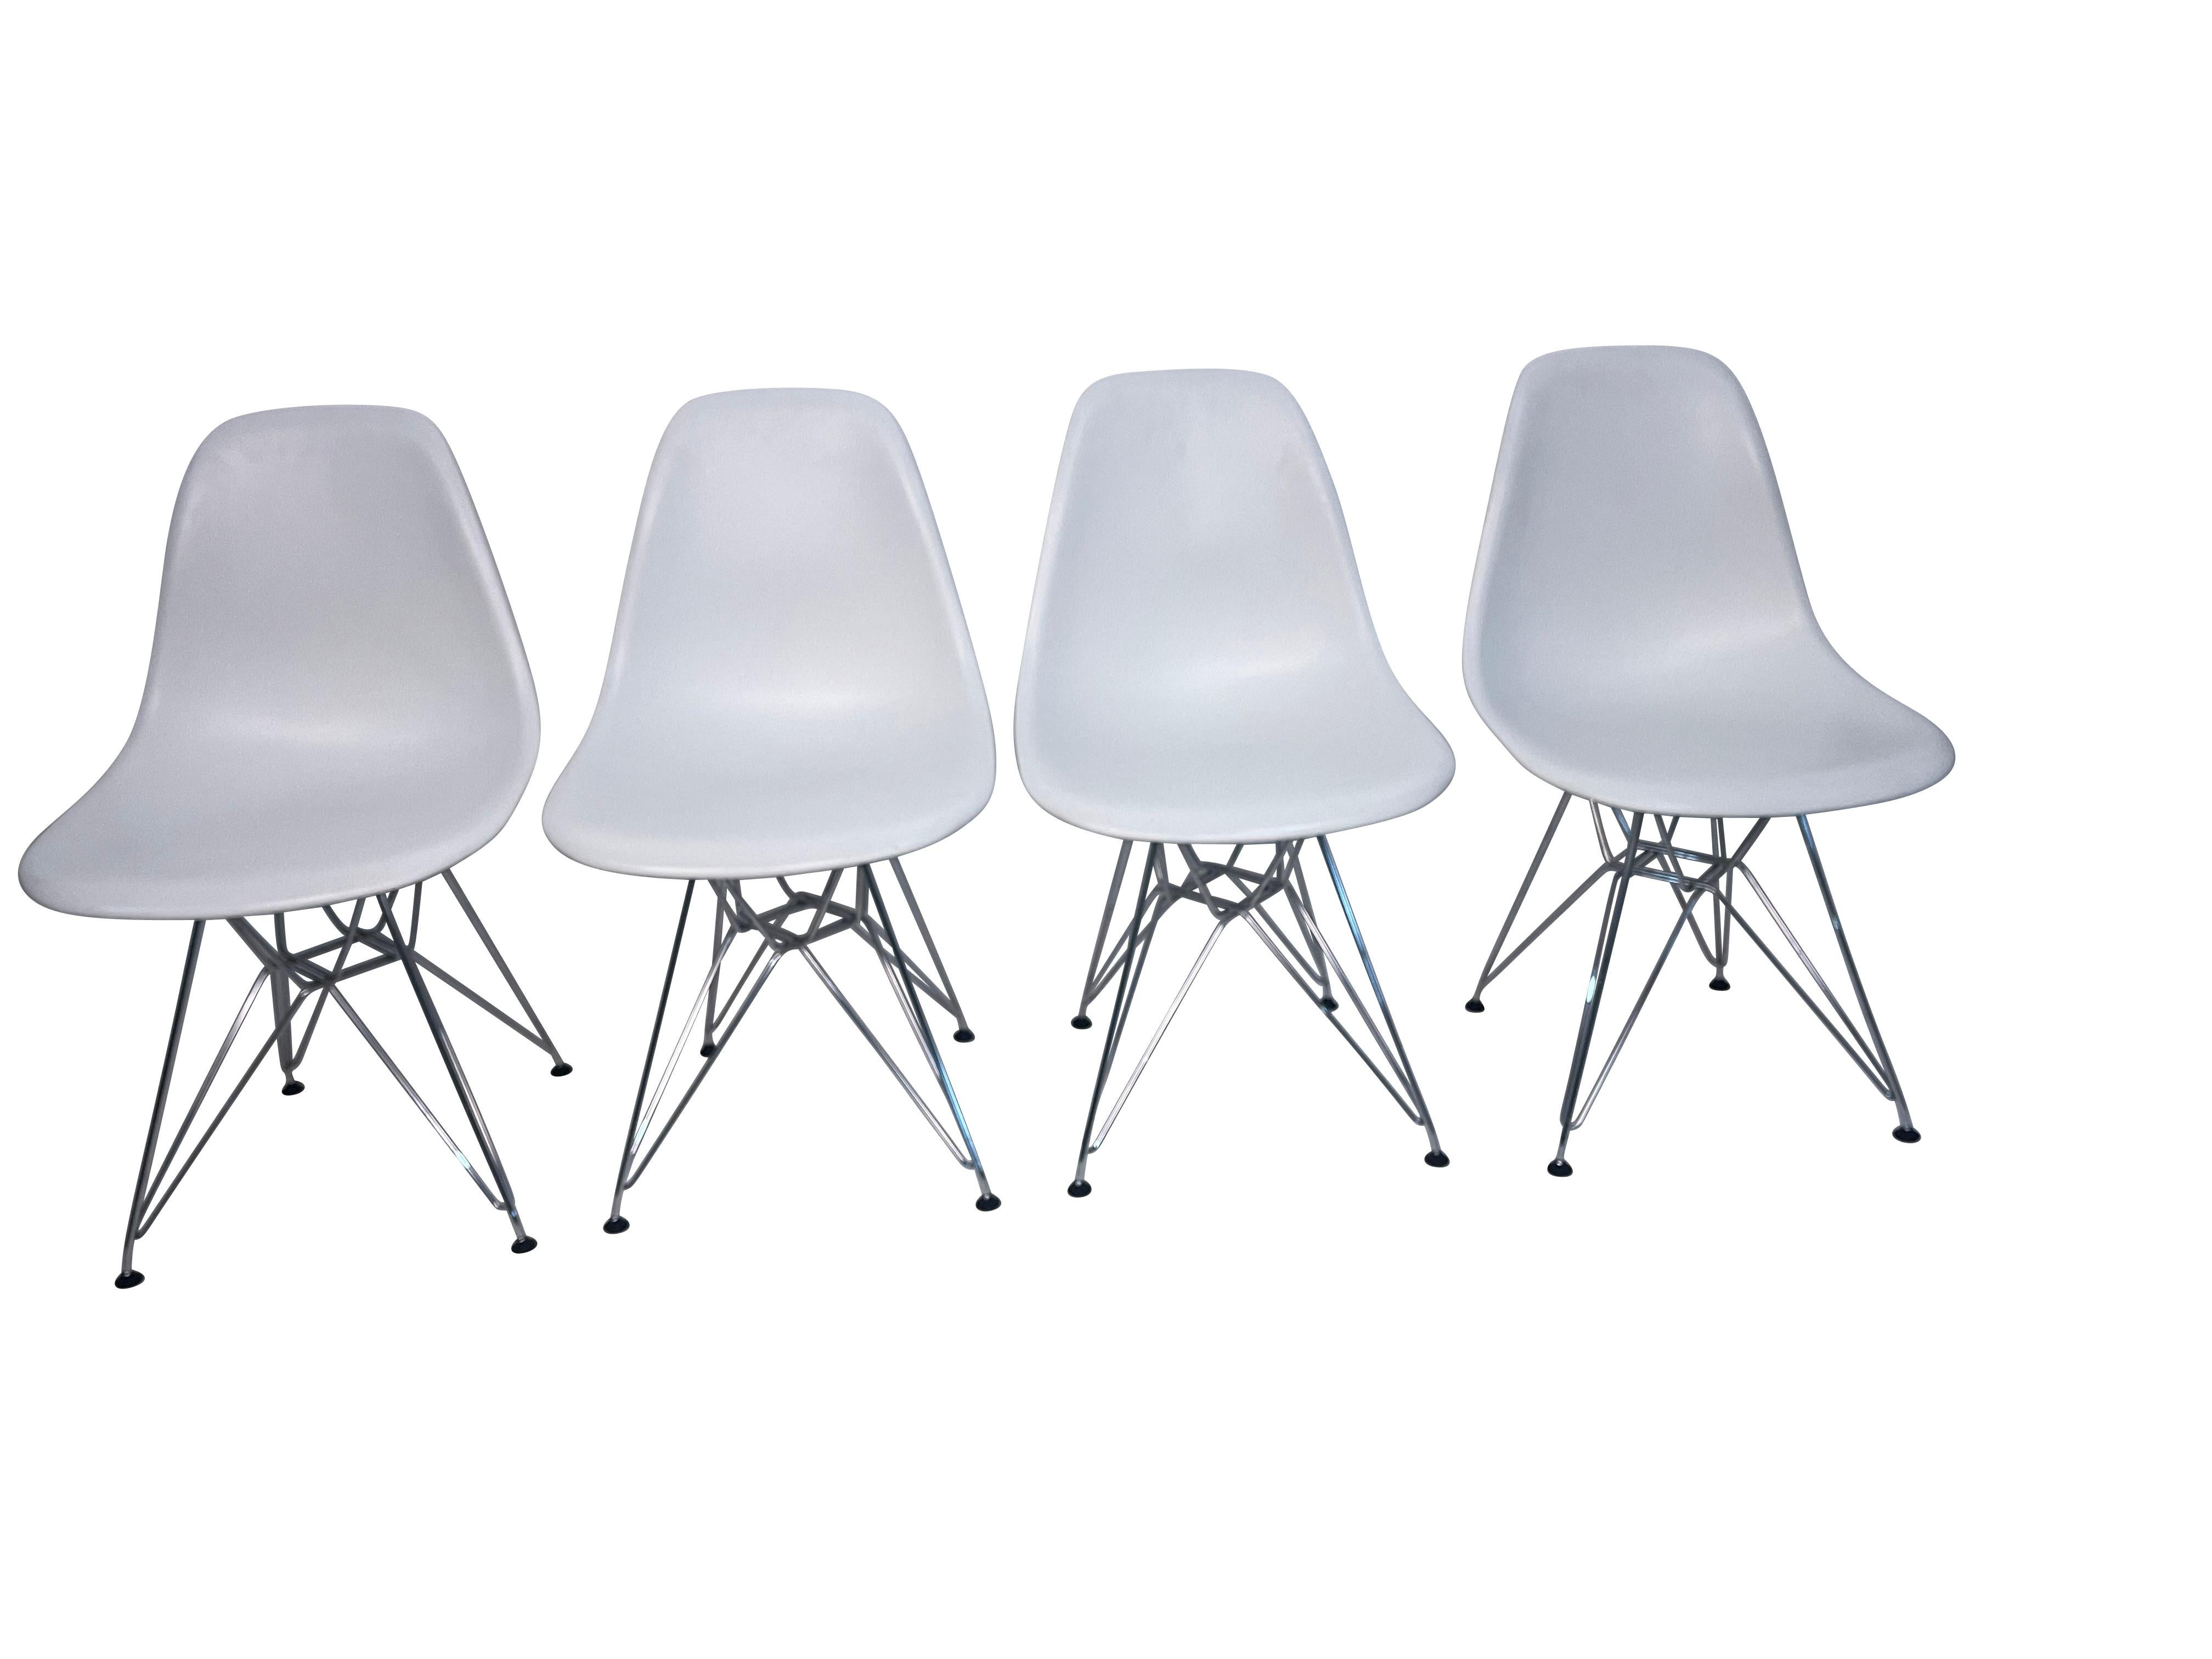 Eames For Knoll Four Molded White Plastic Chairs with Eiffel Tower Bases In Good Condition For Sale In Essex, MA